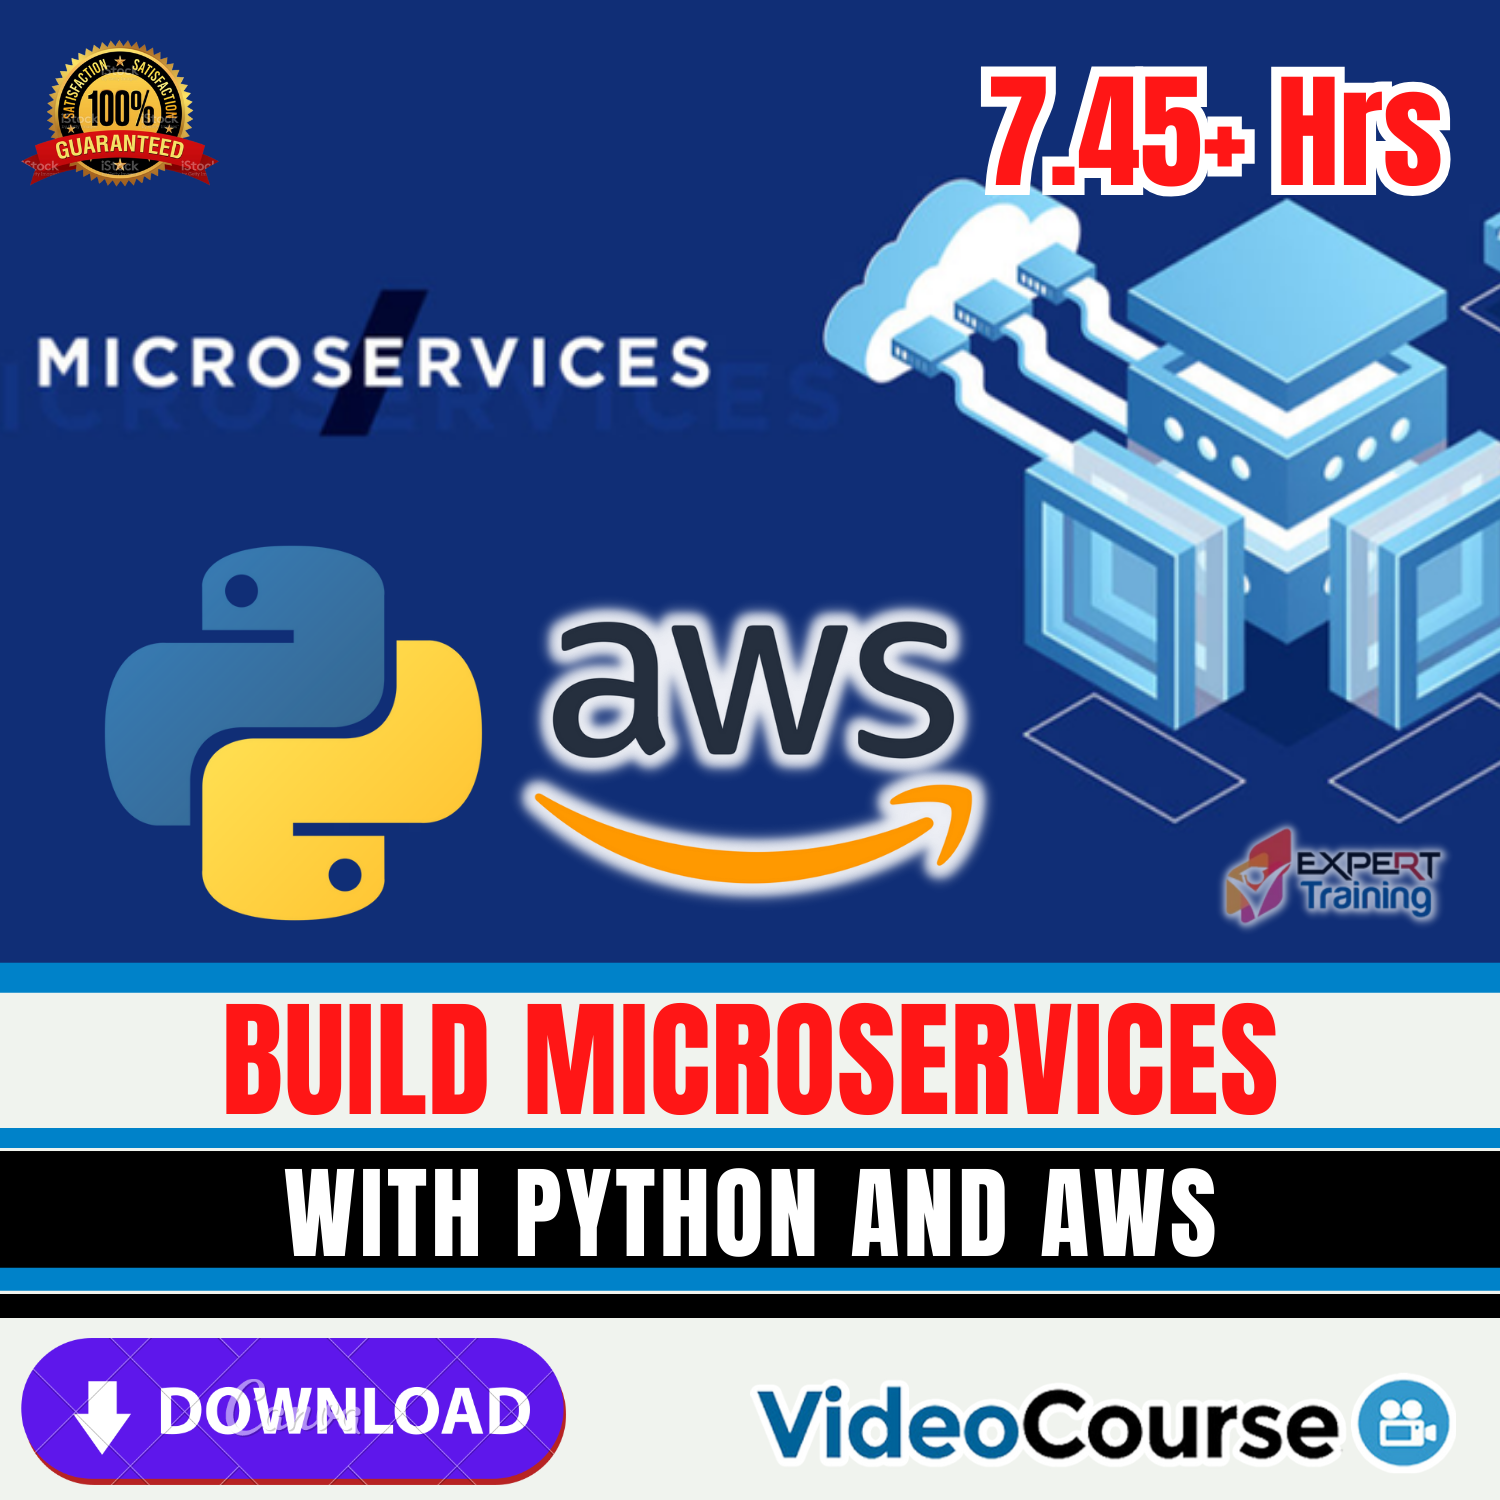 Build Microservices with Python and AWS